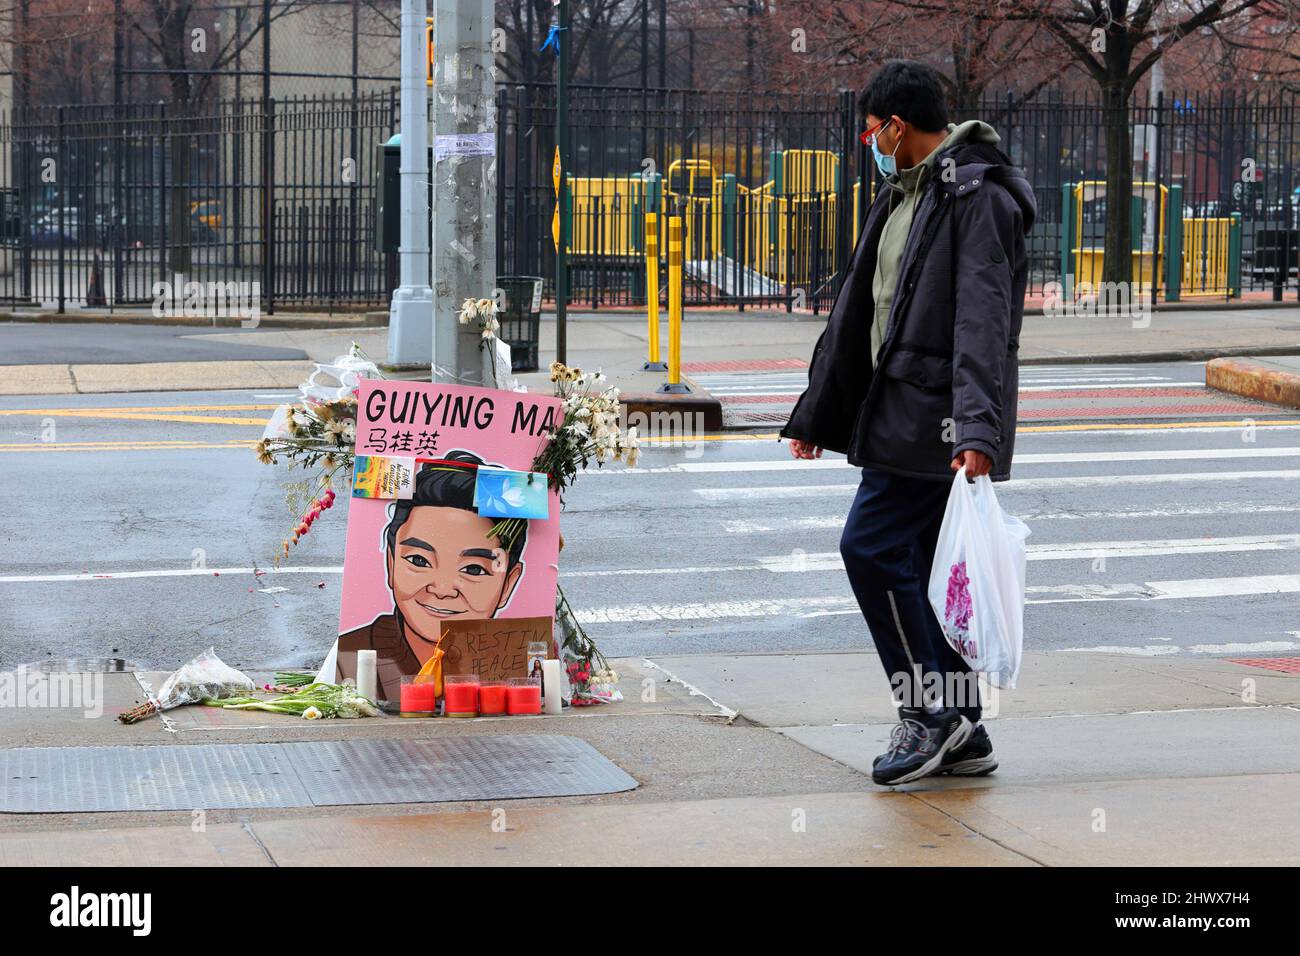 6th March 2022, New York, NY. A person walks by a street memorial to GuiYing Ma located outside Elmhurst Hospital. The elderly woman was attacked ... Stock Photo